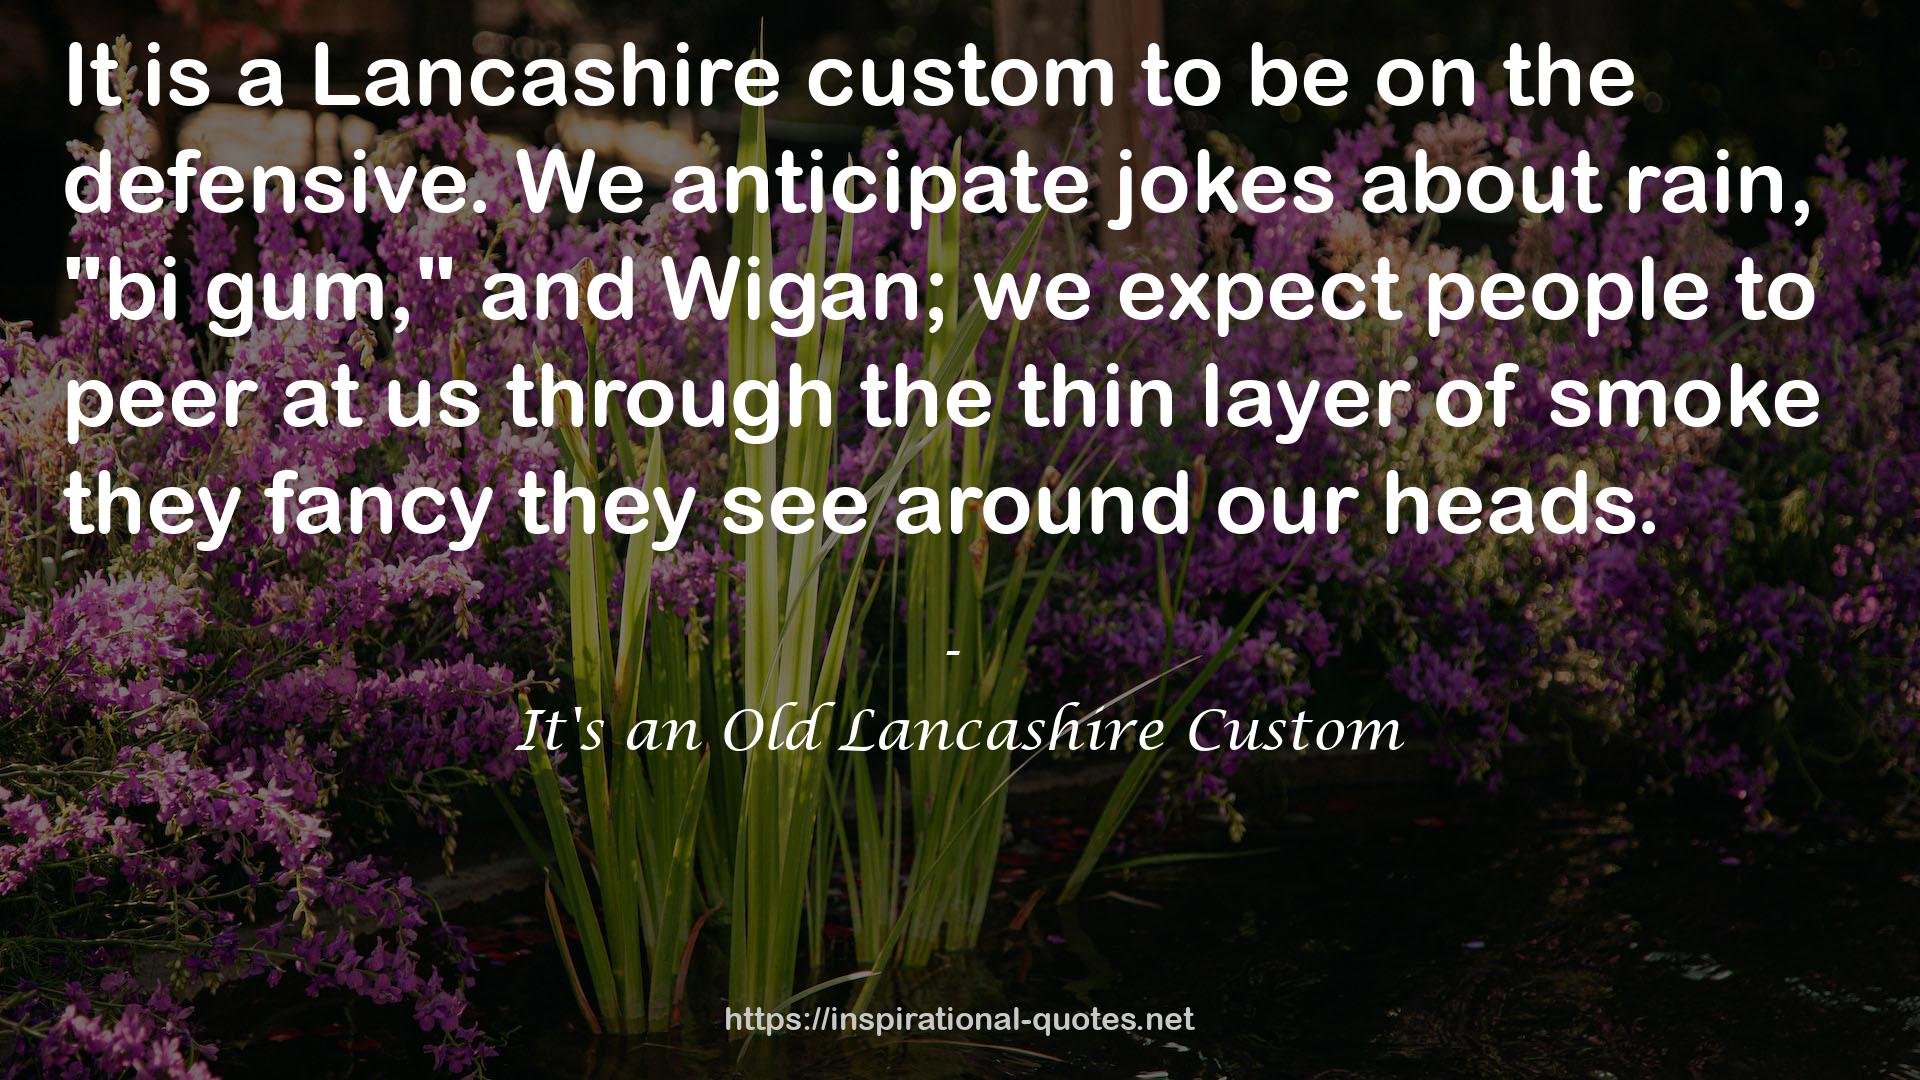 It's an Old Lancashire Custom QUOTES